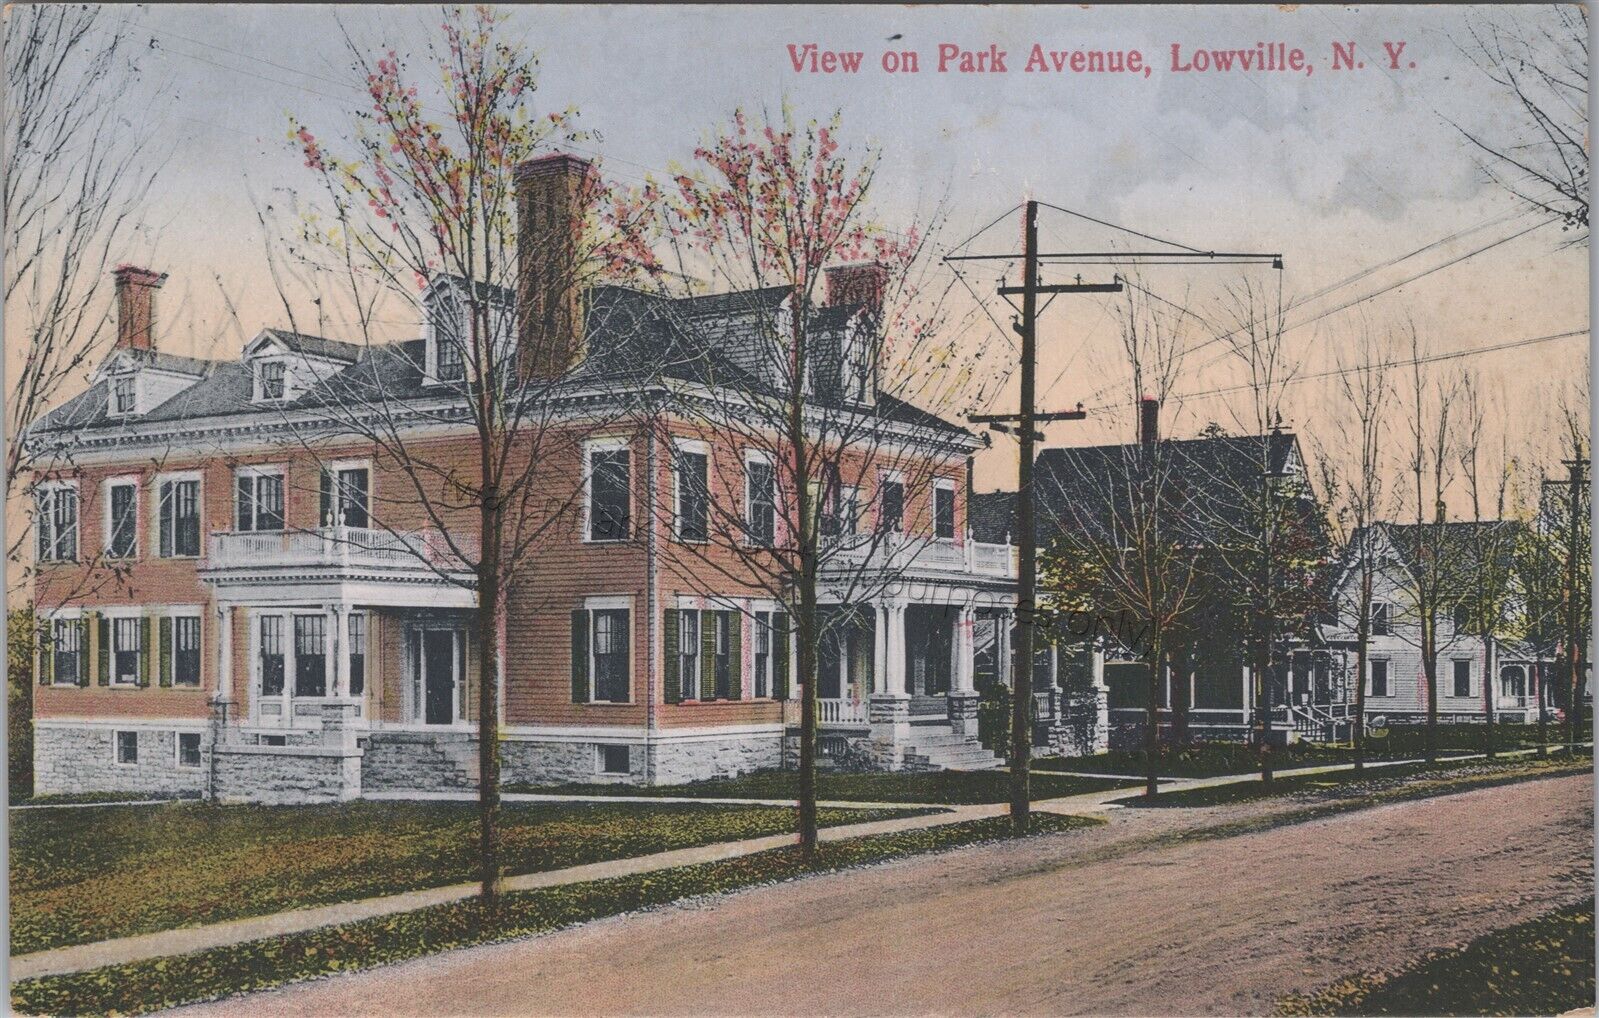 Lowville, NY: View on Park Avenue - Vintage Lewis County, New York Postcard